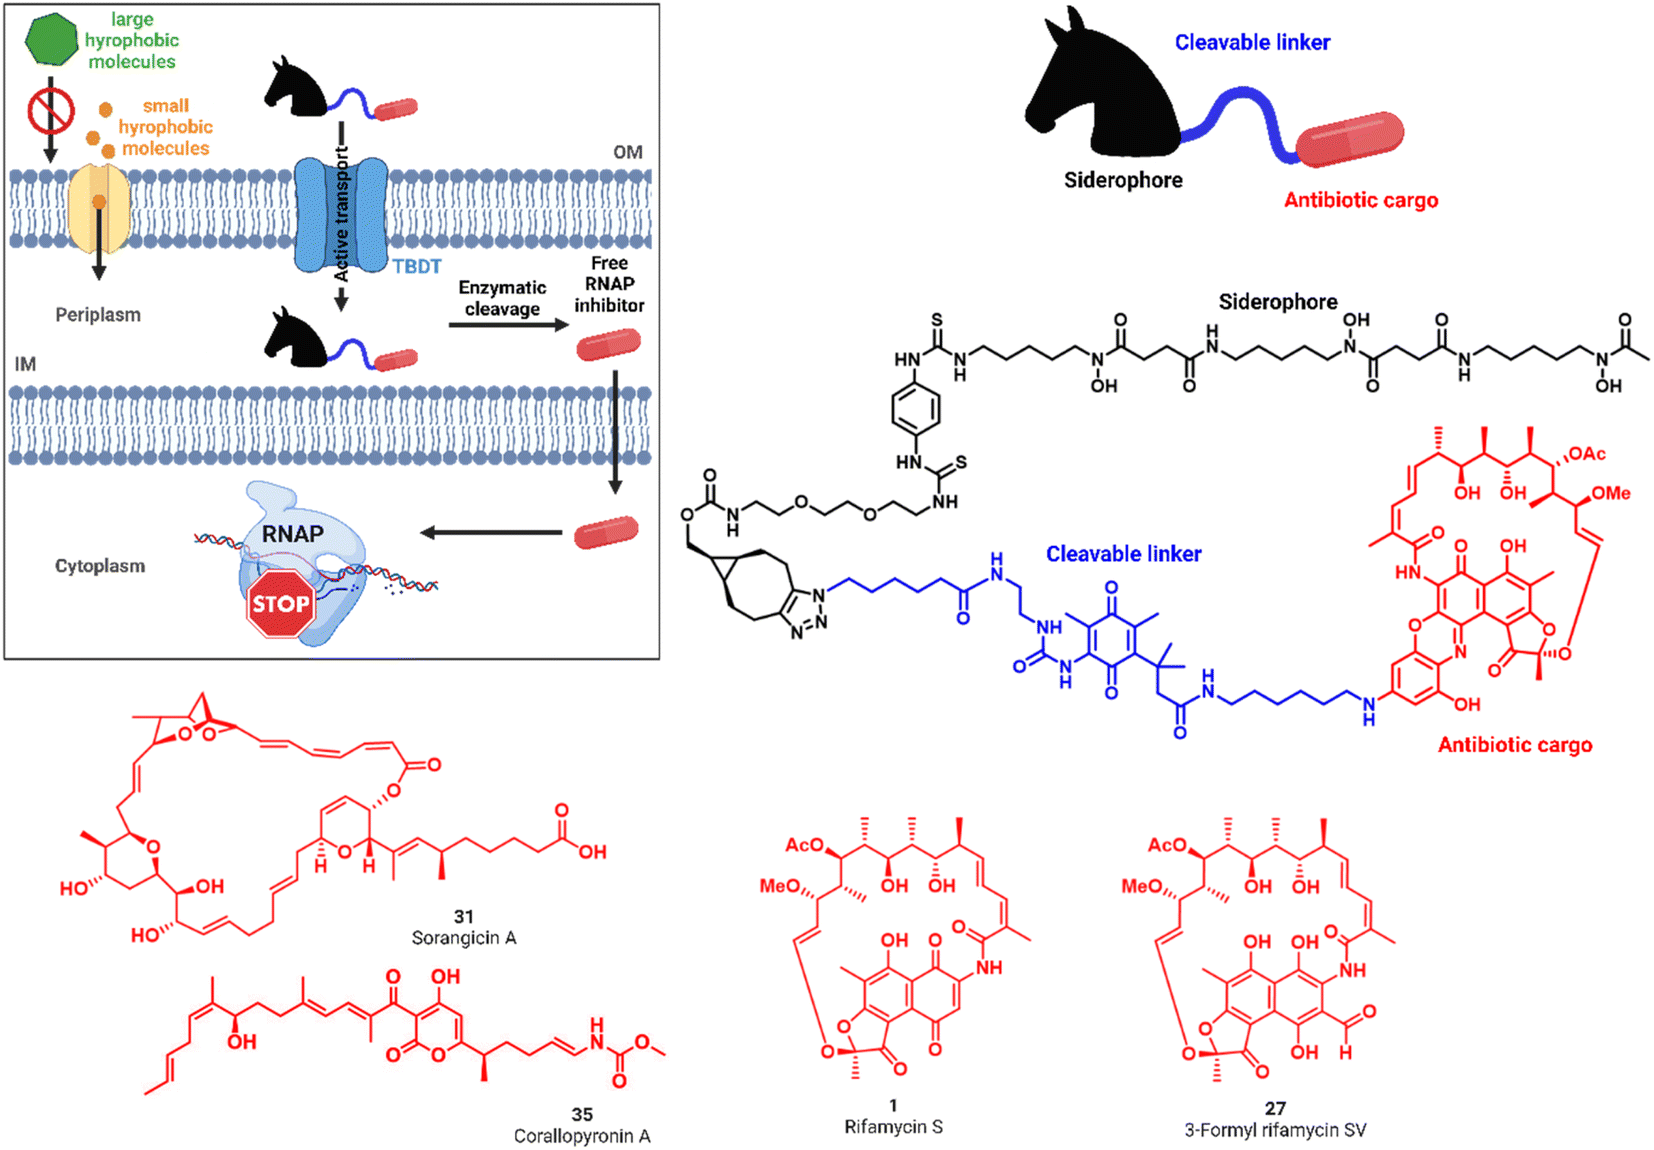 Siderophore conjugation with cleavable linkers boosts the potency of RNA  polymerase inhibitors against multidrug-resistant E. coli - Chemical  Science (RSC Publishing) DOI:10.1039/D2SC06850H